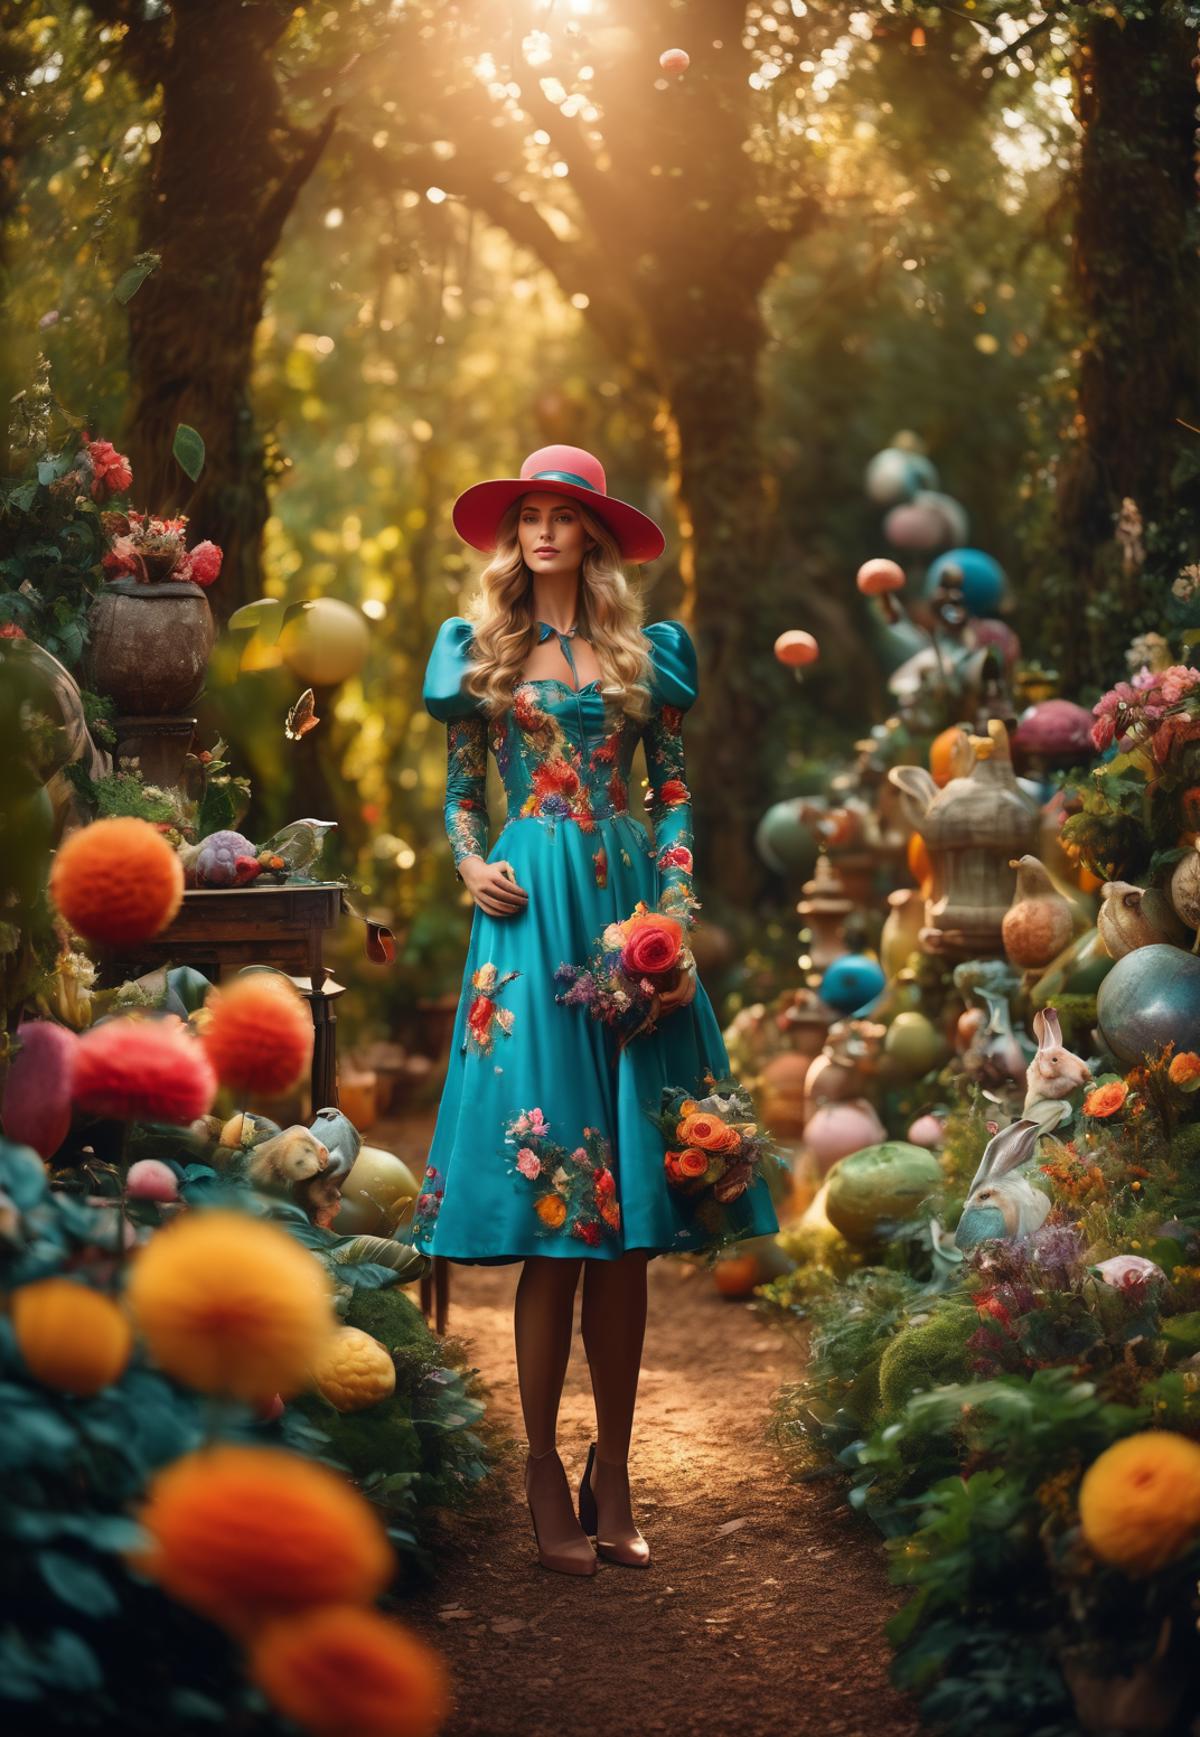 A woman in a blue dress and pink hat stands in a whimsical garden filled with colorful flowers and balls.